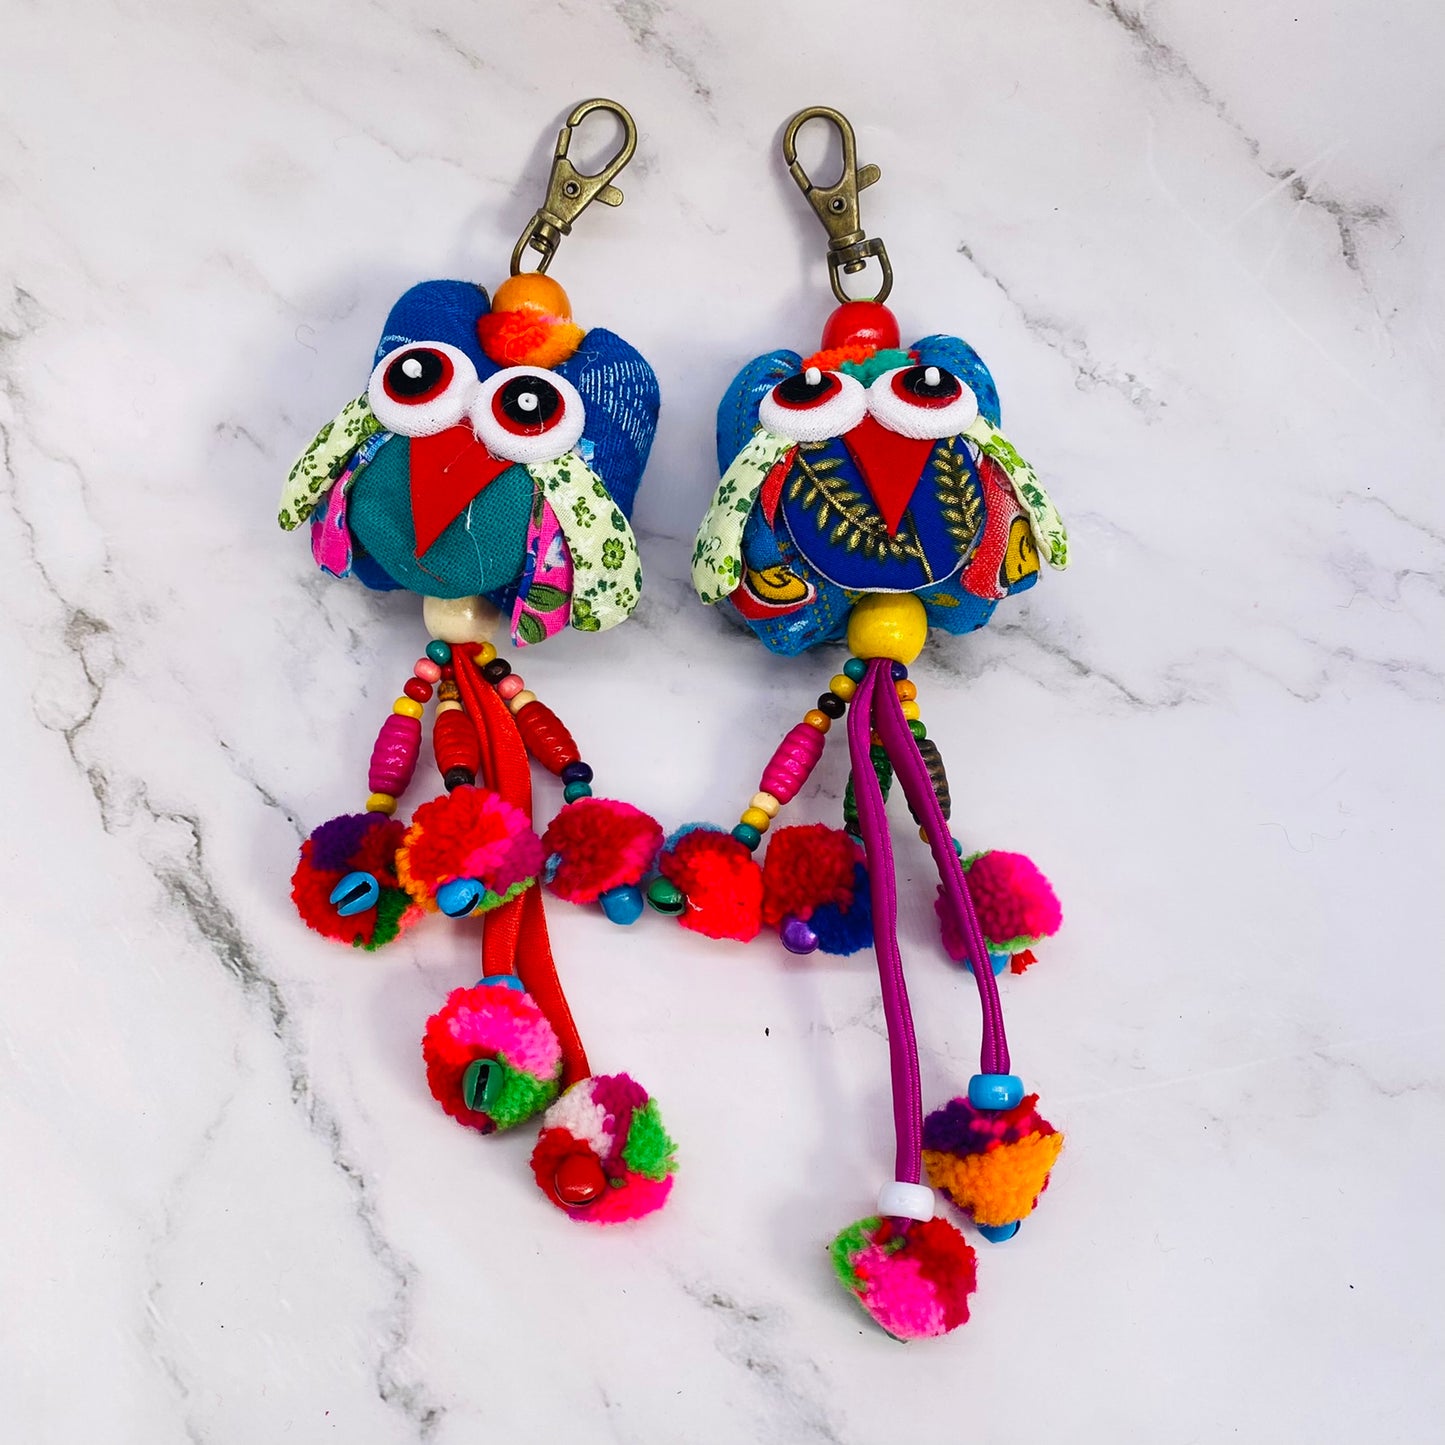 Owl Keychain, Colorful Owl Bag charm, Bag Accessories, Handmade Bag Charm, Cute Key Ring, Gift for Her, Symbol of wisdom